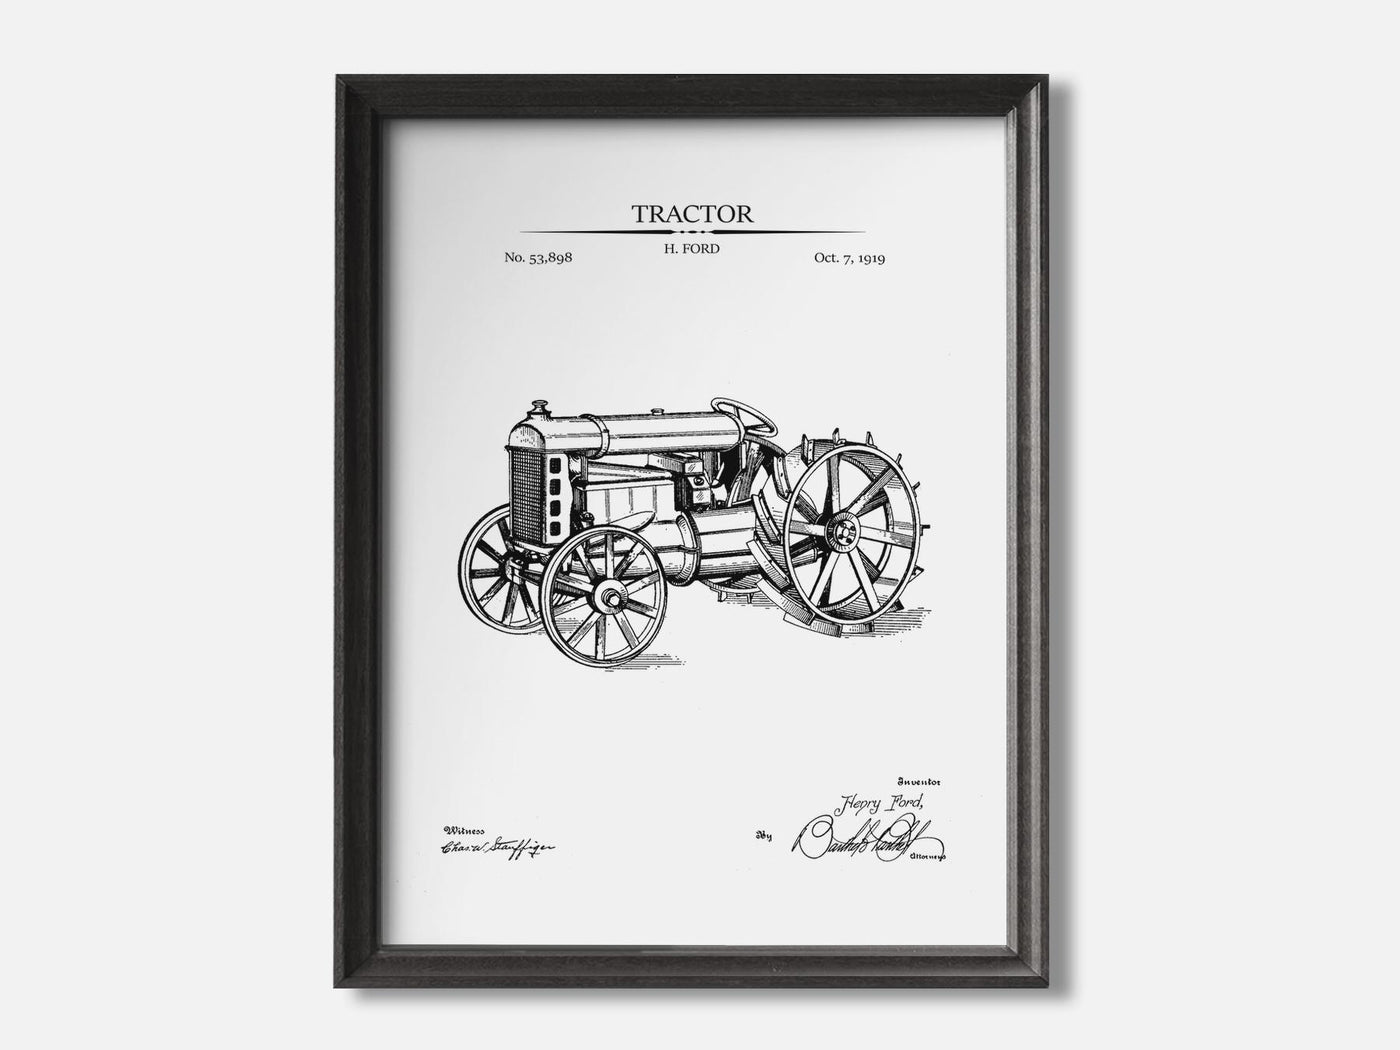 Tractor Patent Print mockup - A_t10025.3-V1-PC_F+B-SS_1-PS_5x7-C_whi variant